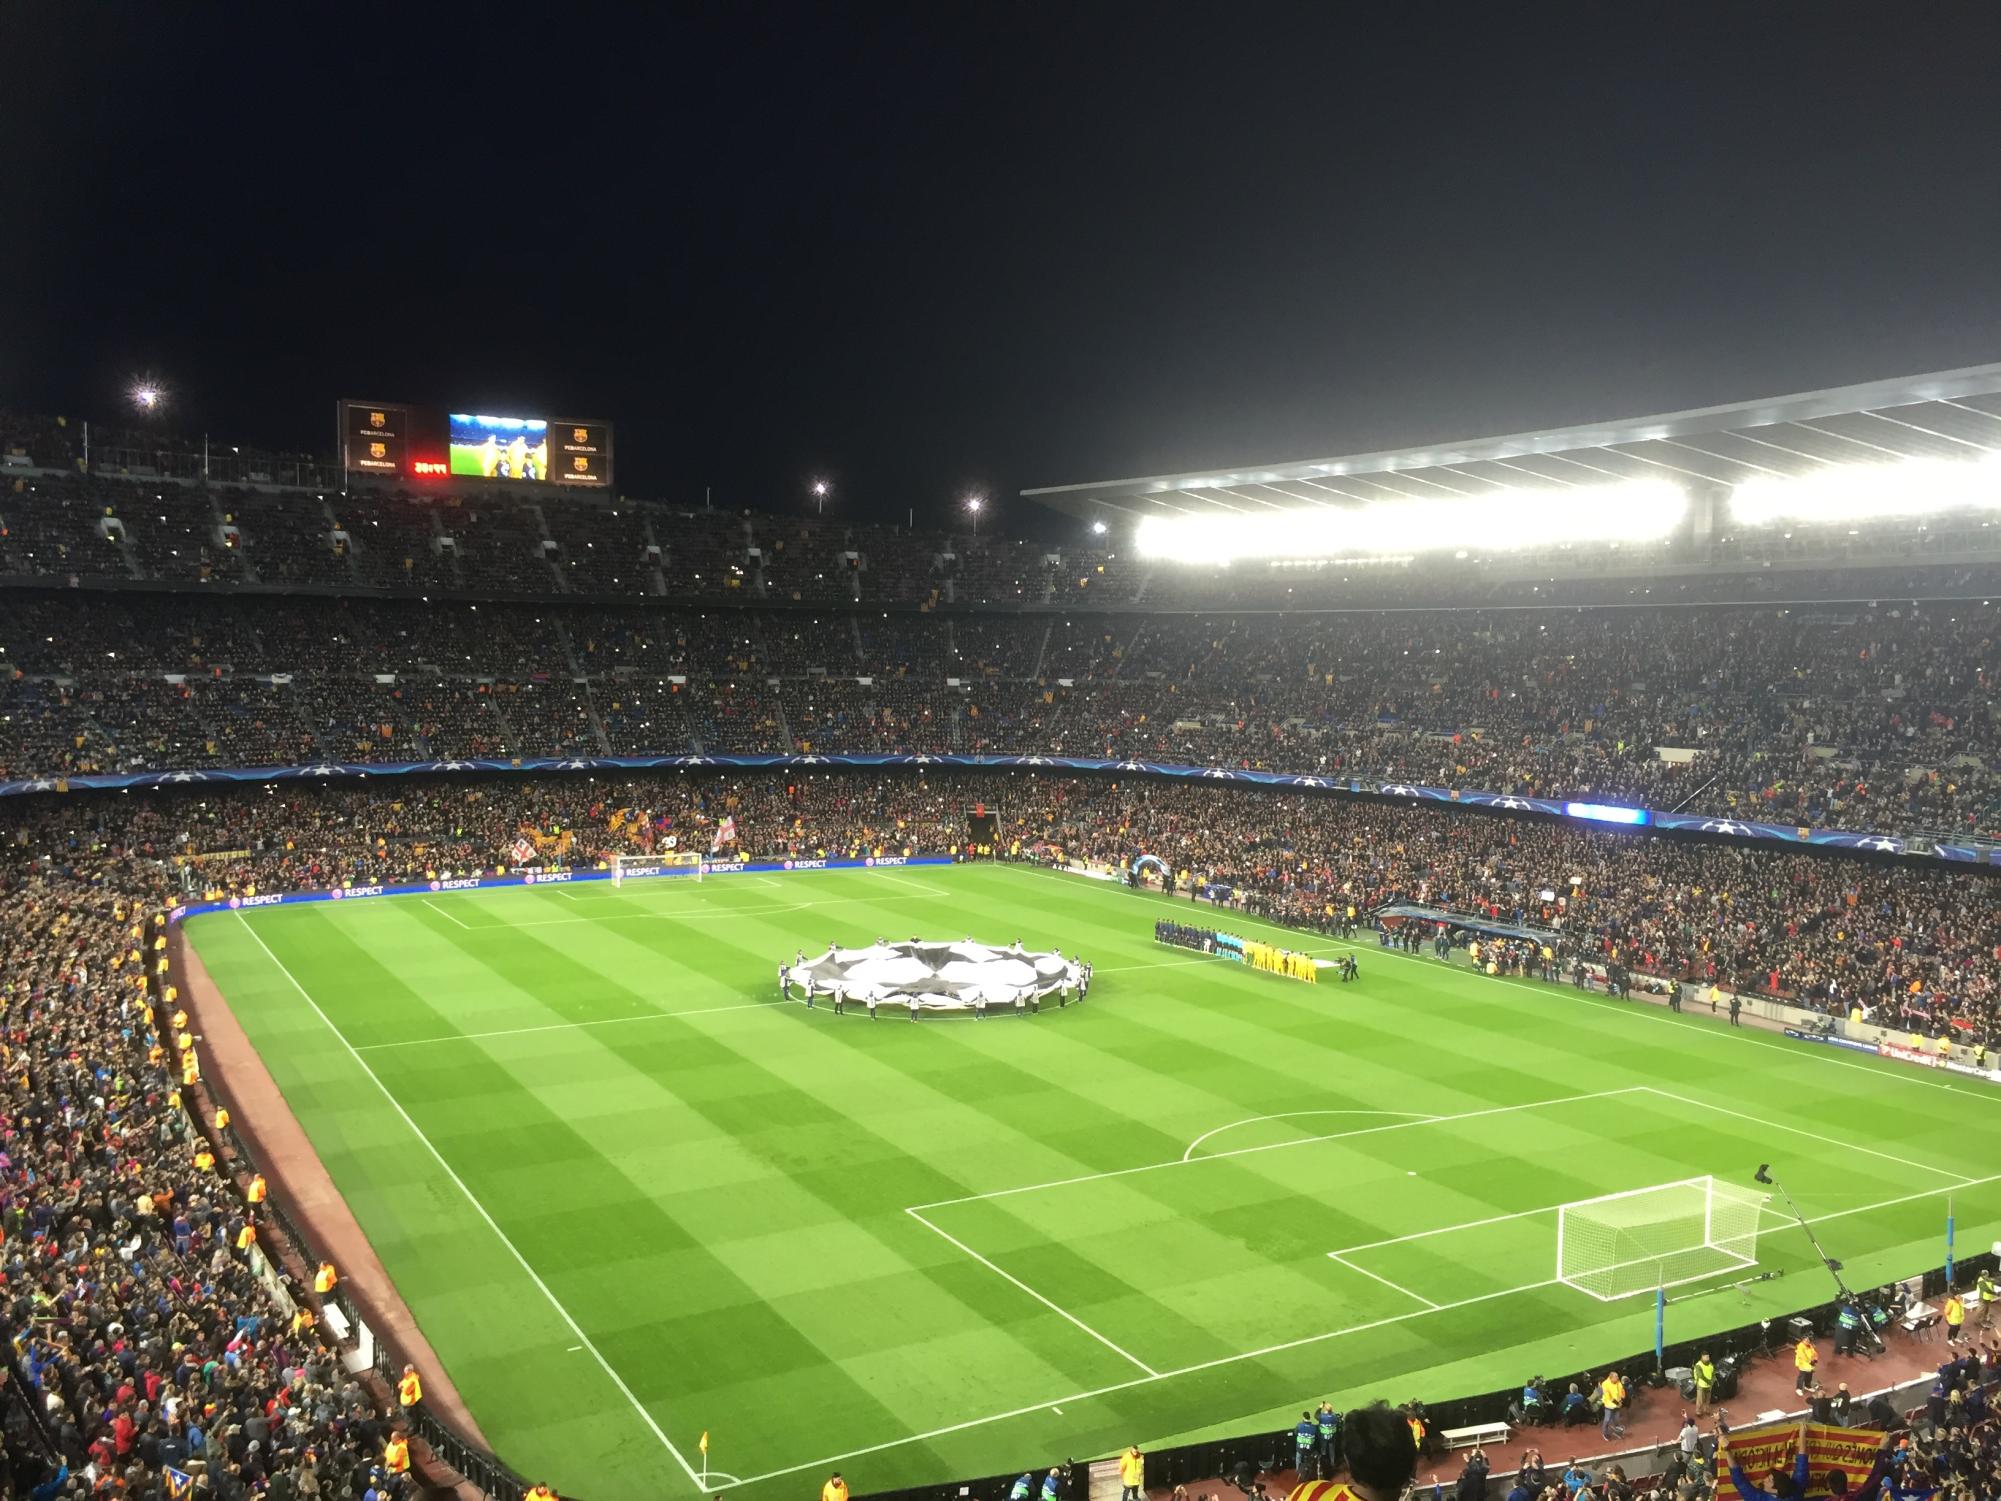 Champions league night at the camp nou in Barcelona 